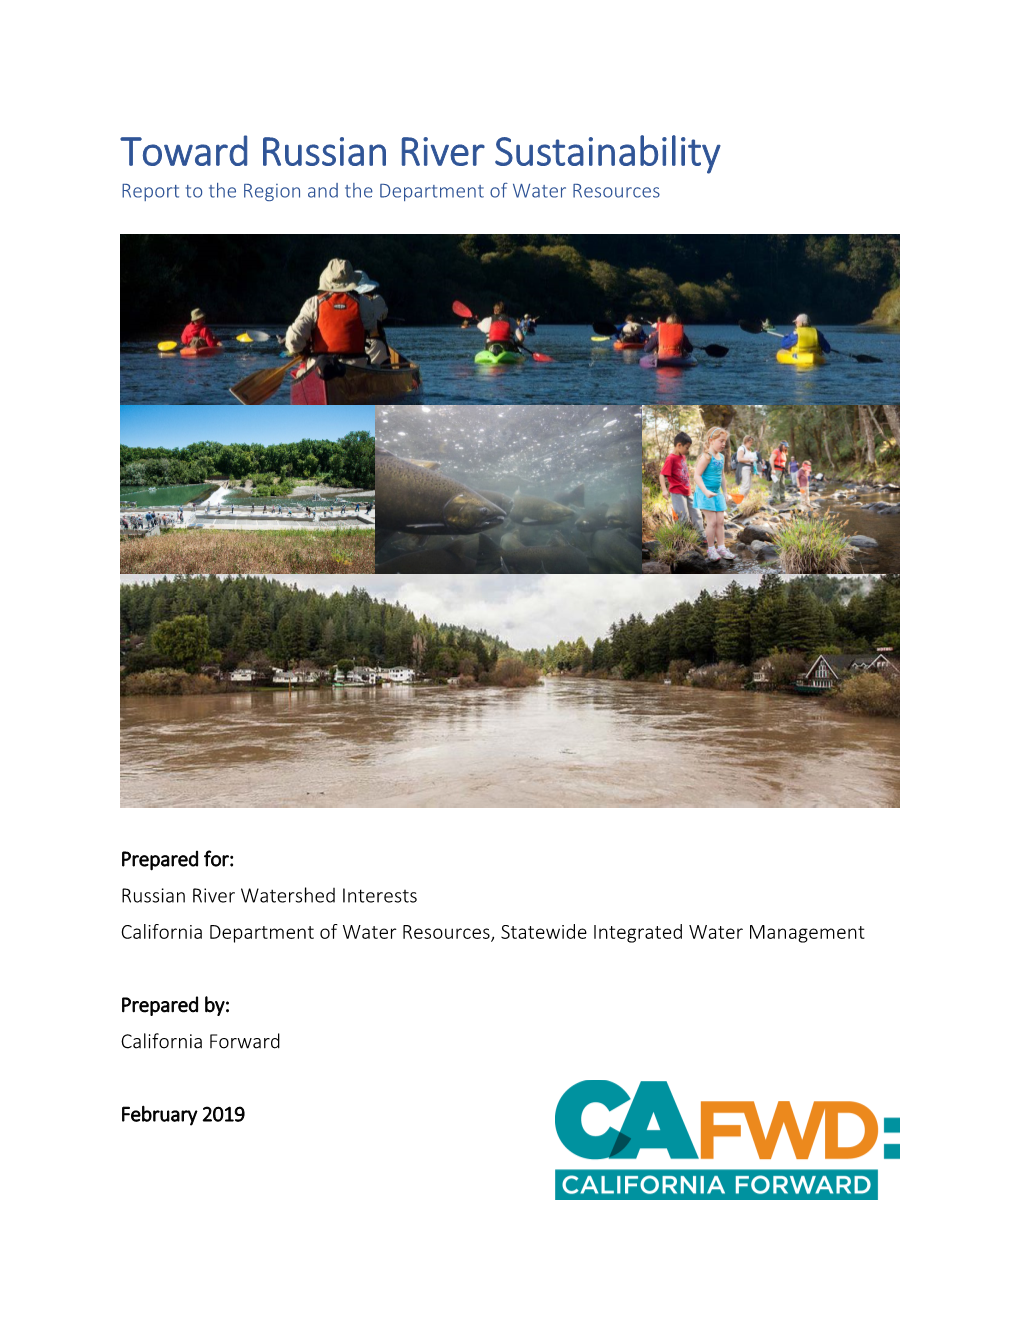 Russian River Watershed Interests California Department of Water Resources, Statewide Integrated Water Management